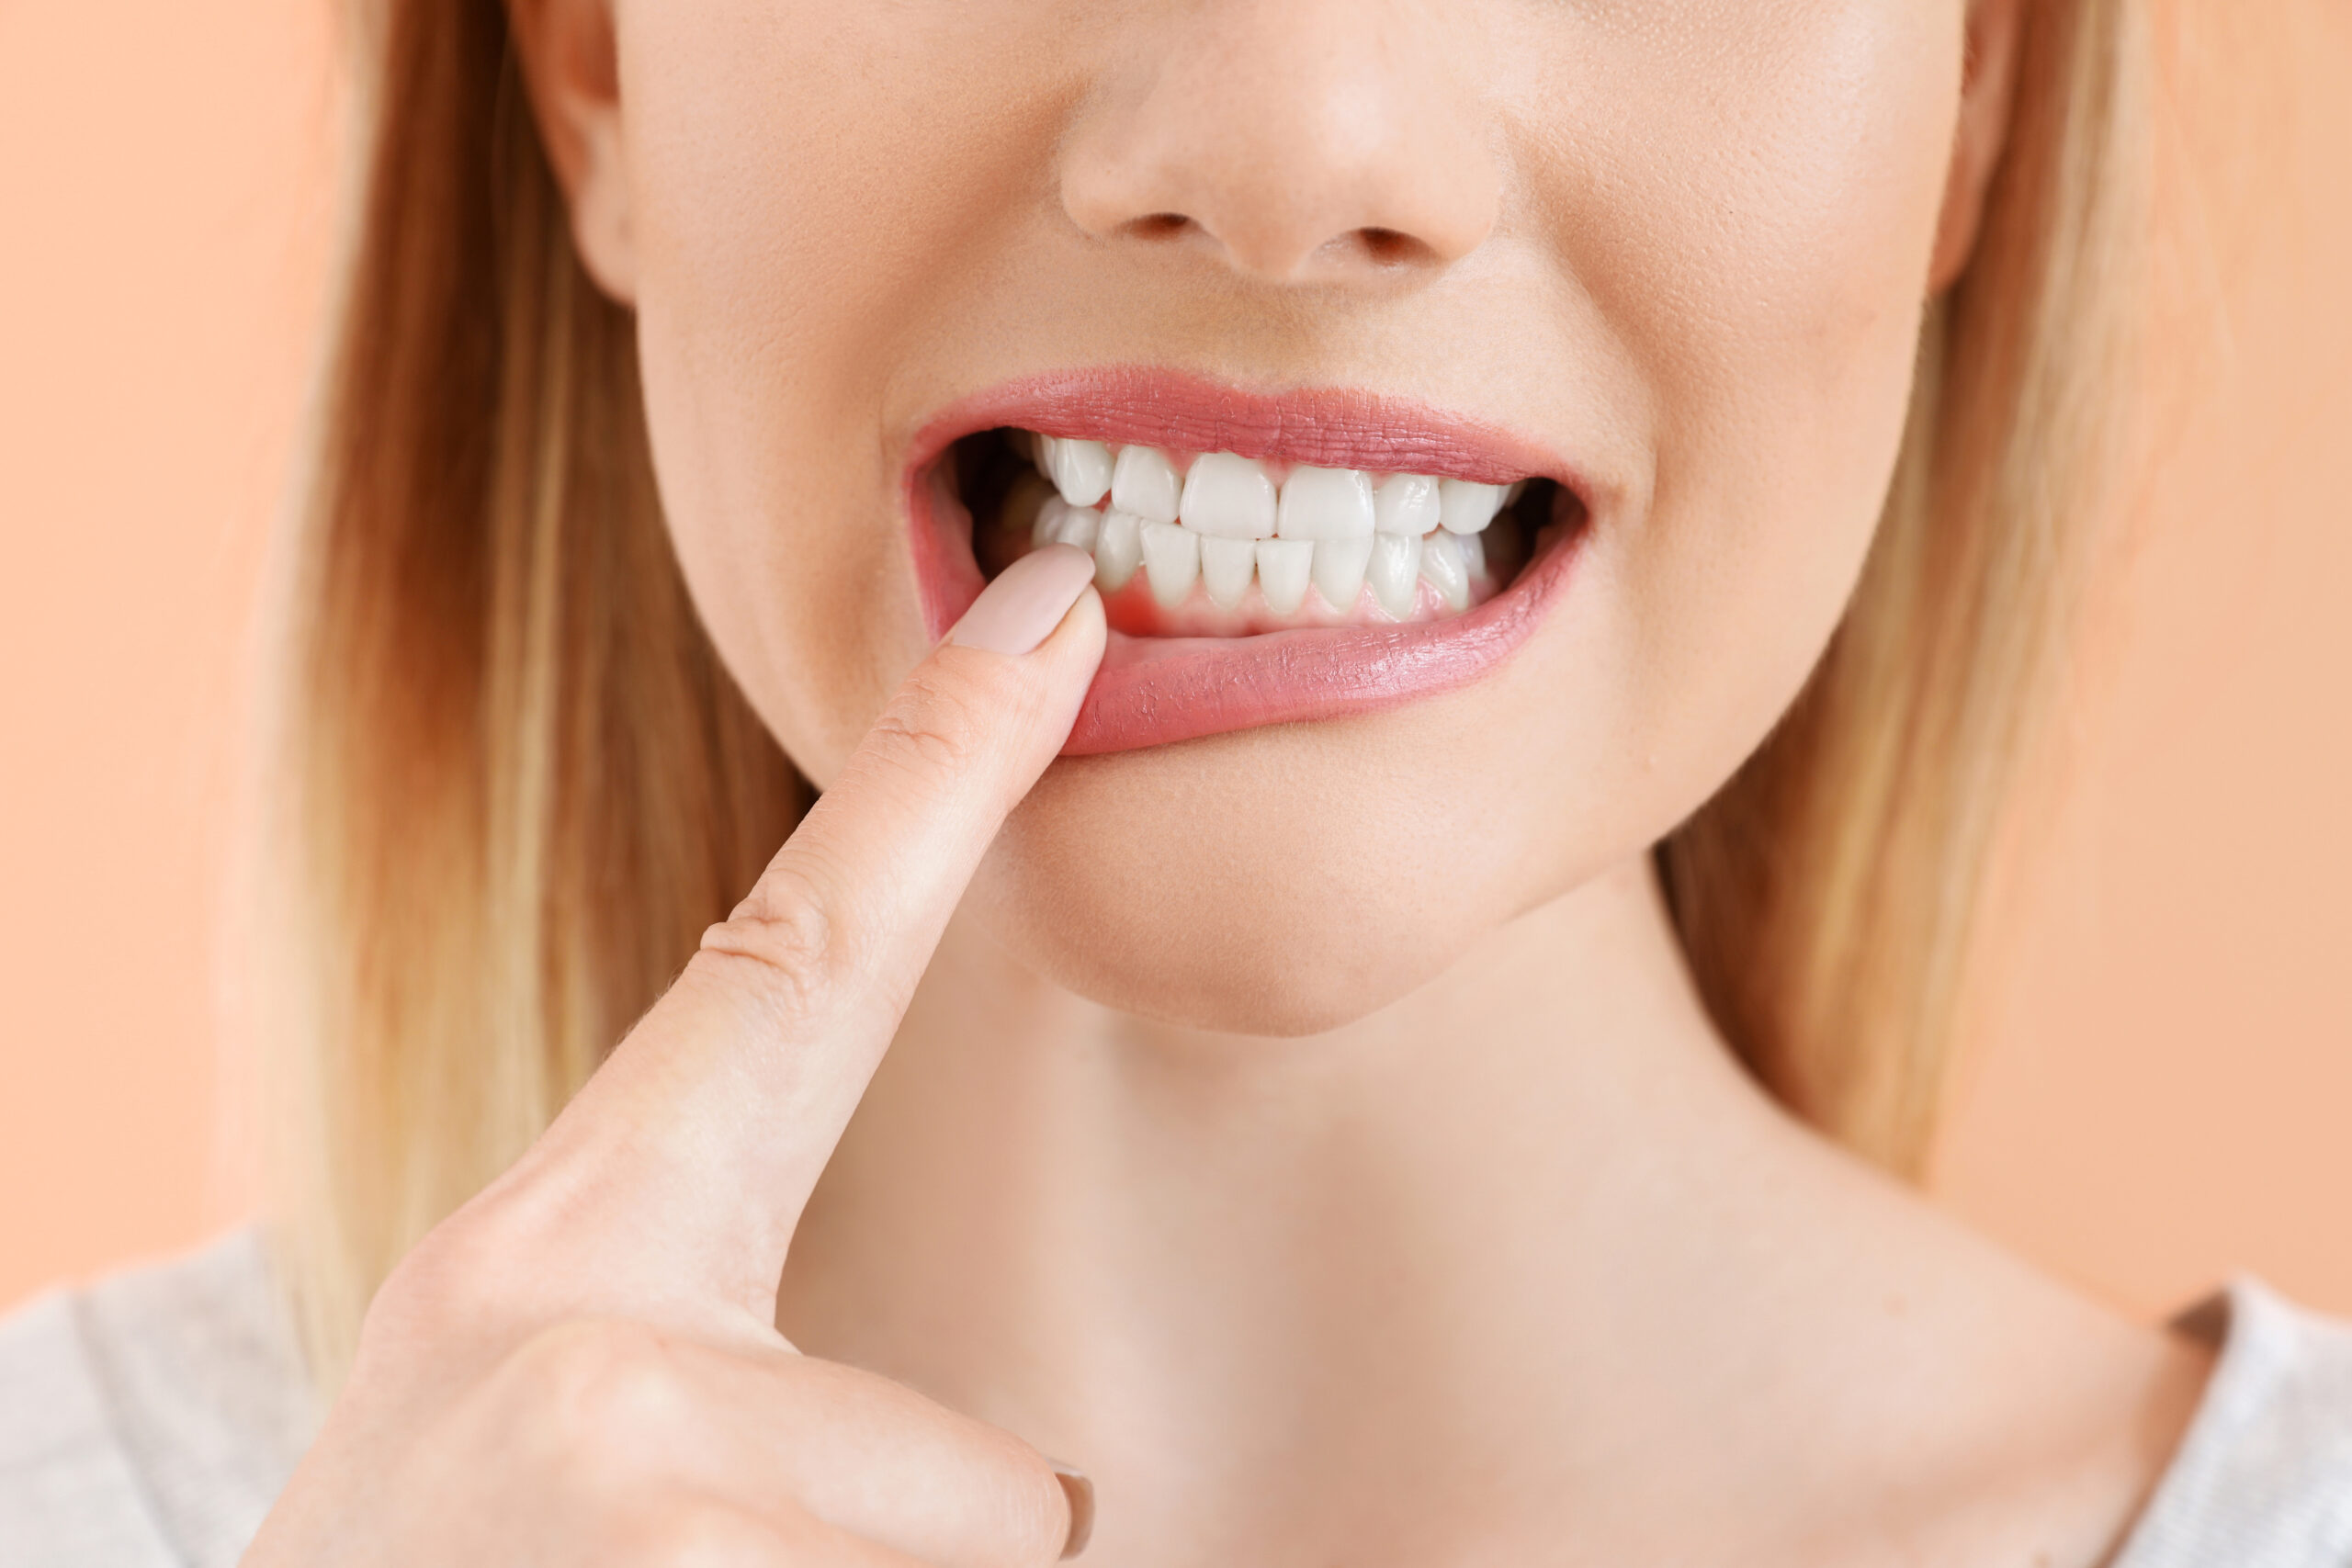 How To Treat Burned Gums From Teeth Whitening?